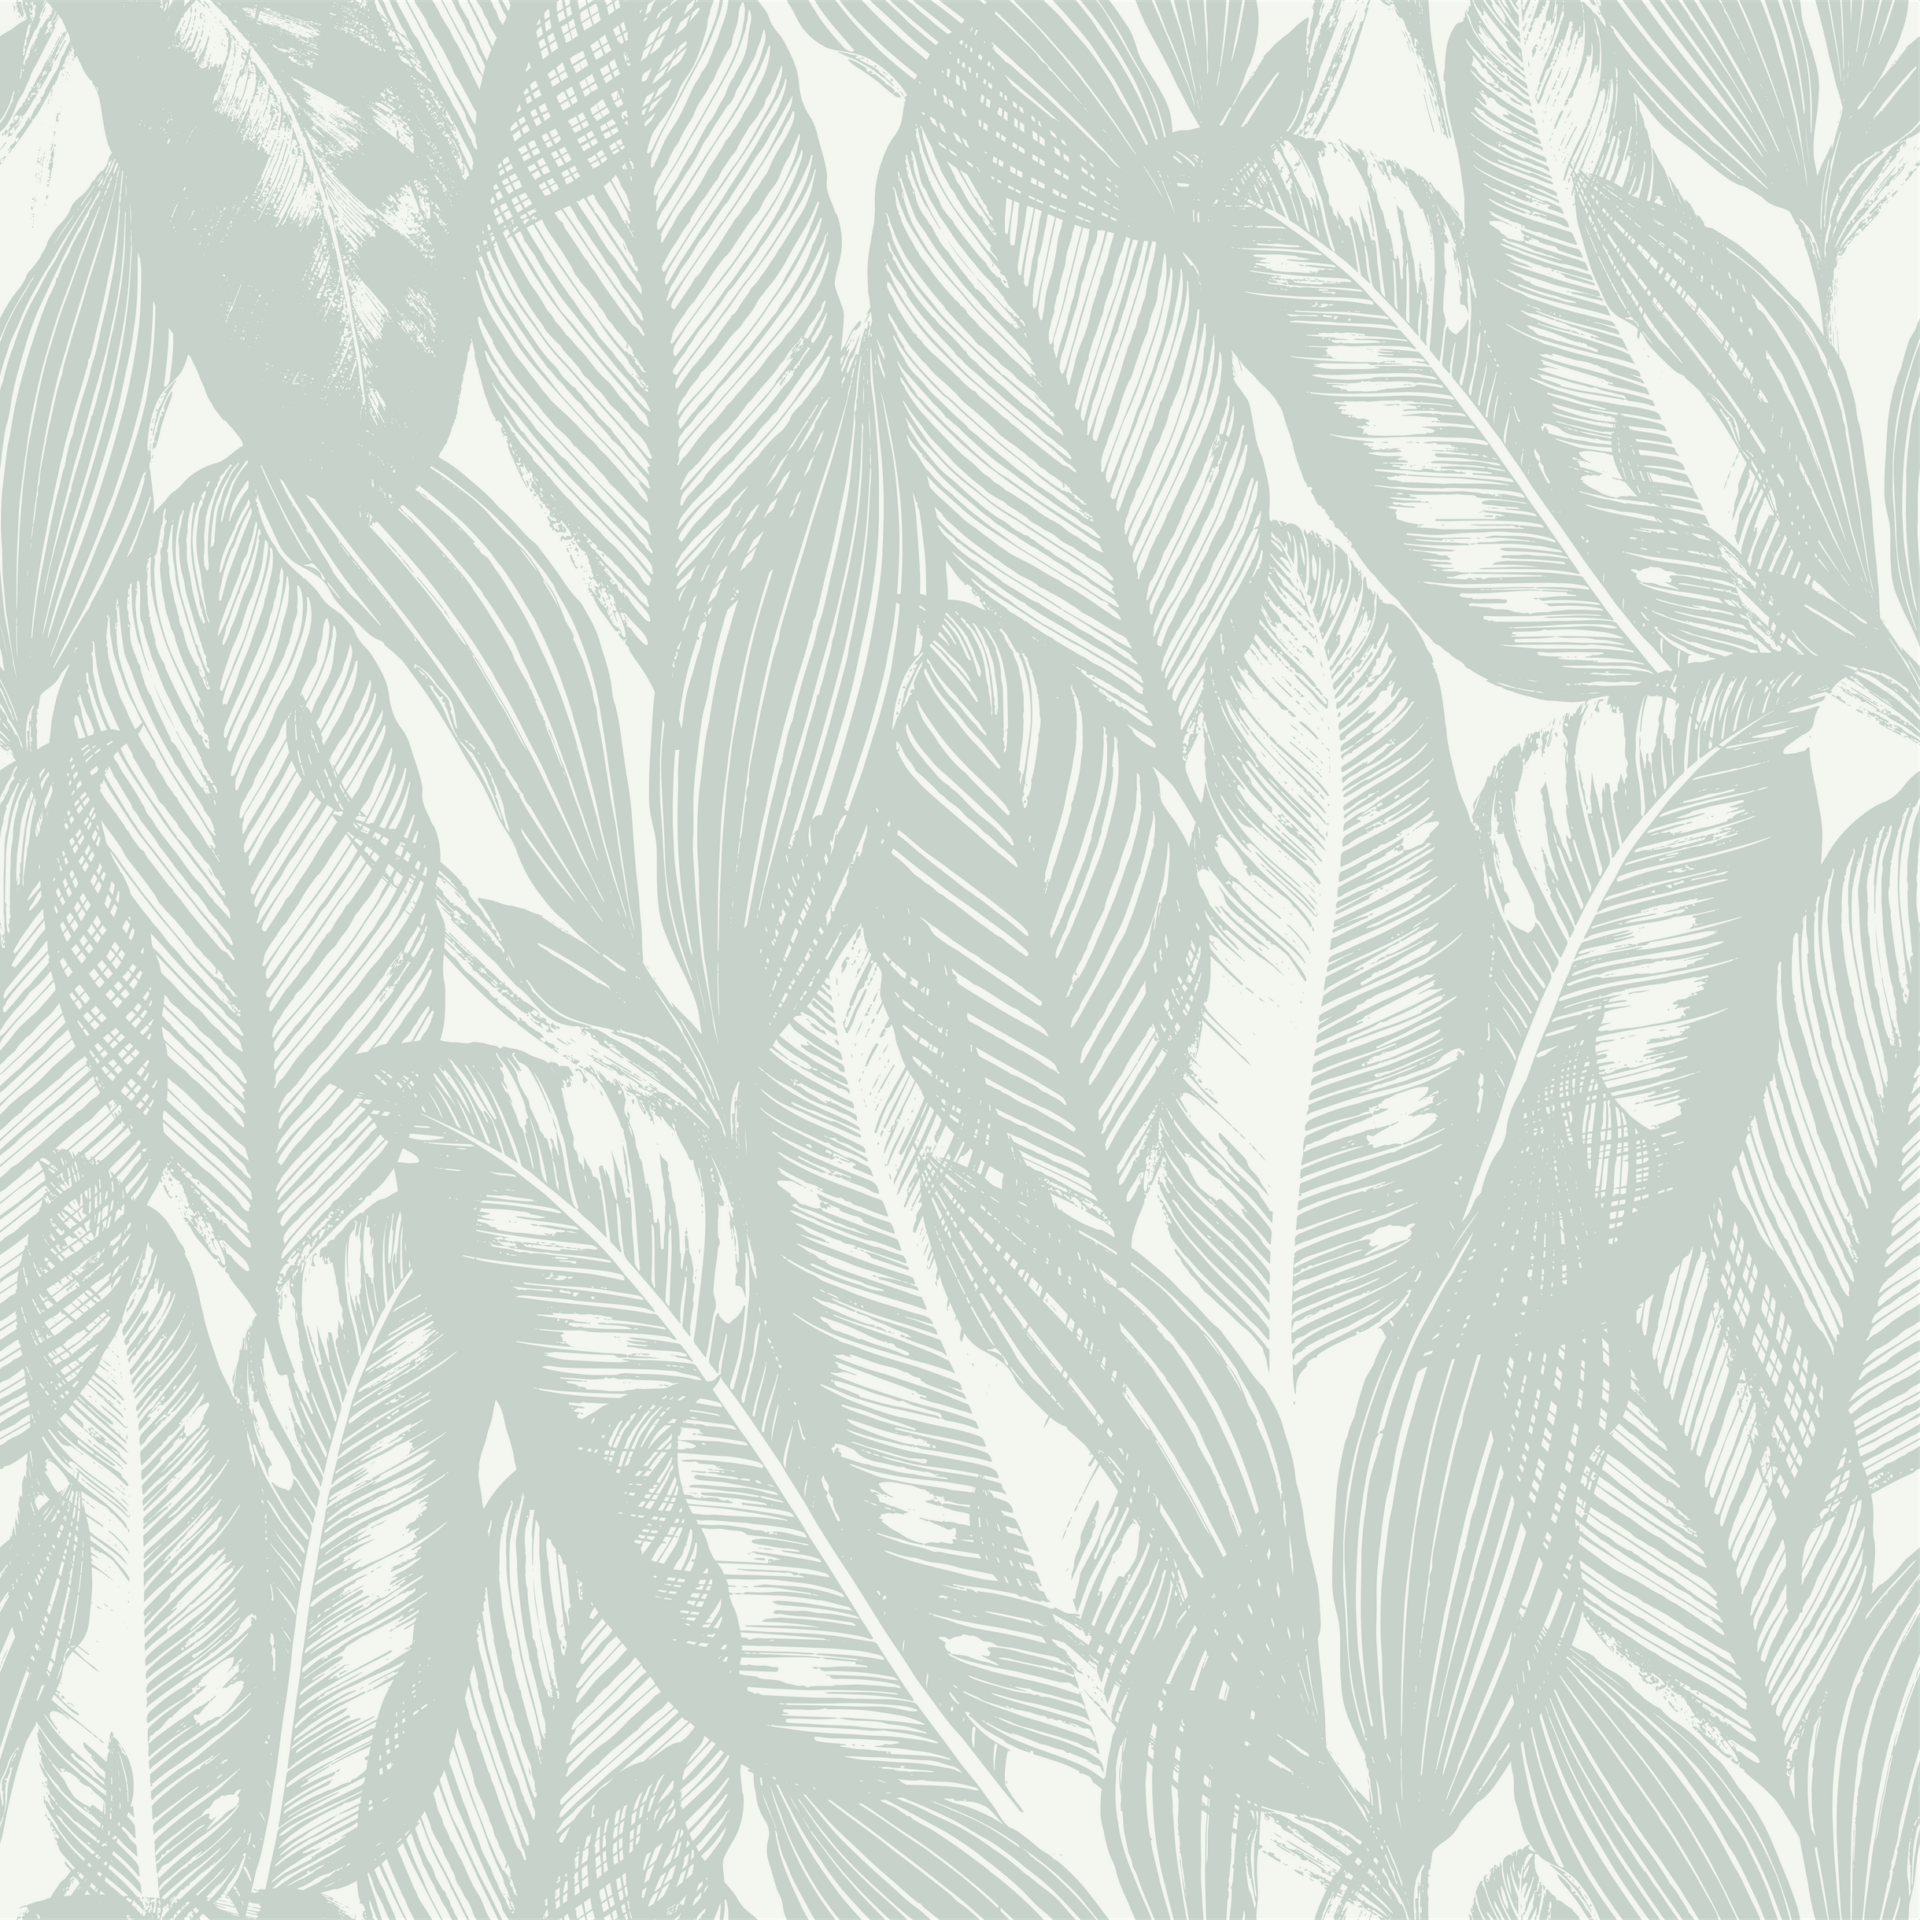 The image shows a seamless pattern of sketched tropical leaves in various shades of gray, creating a dense, nature-inspired background or wallpaper.